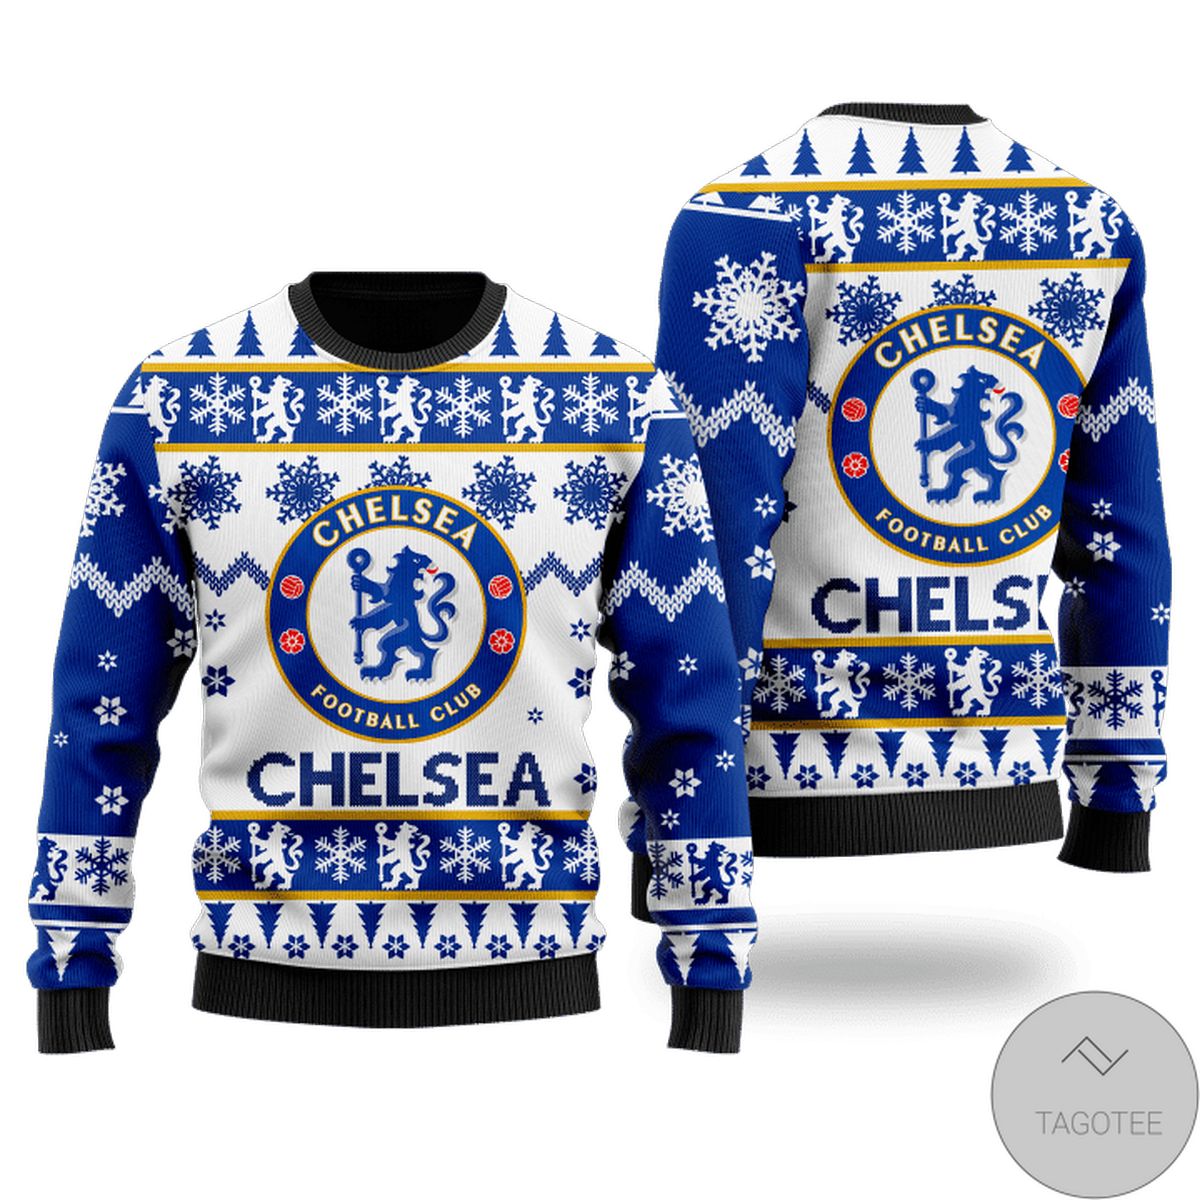 Chelsea Football Club Ugly Christmas Sweater